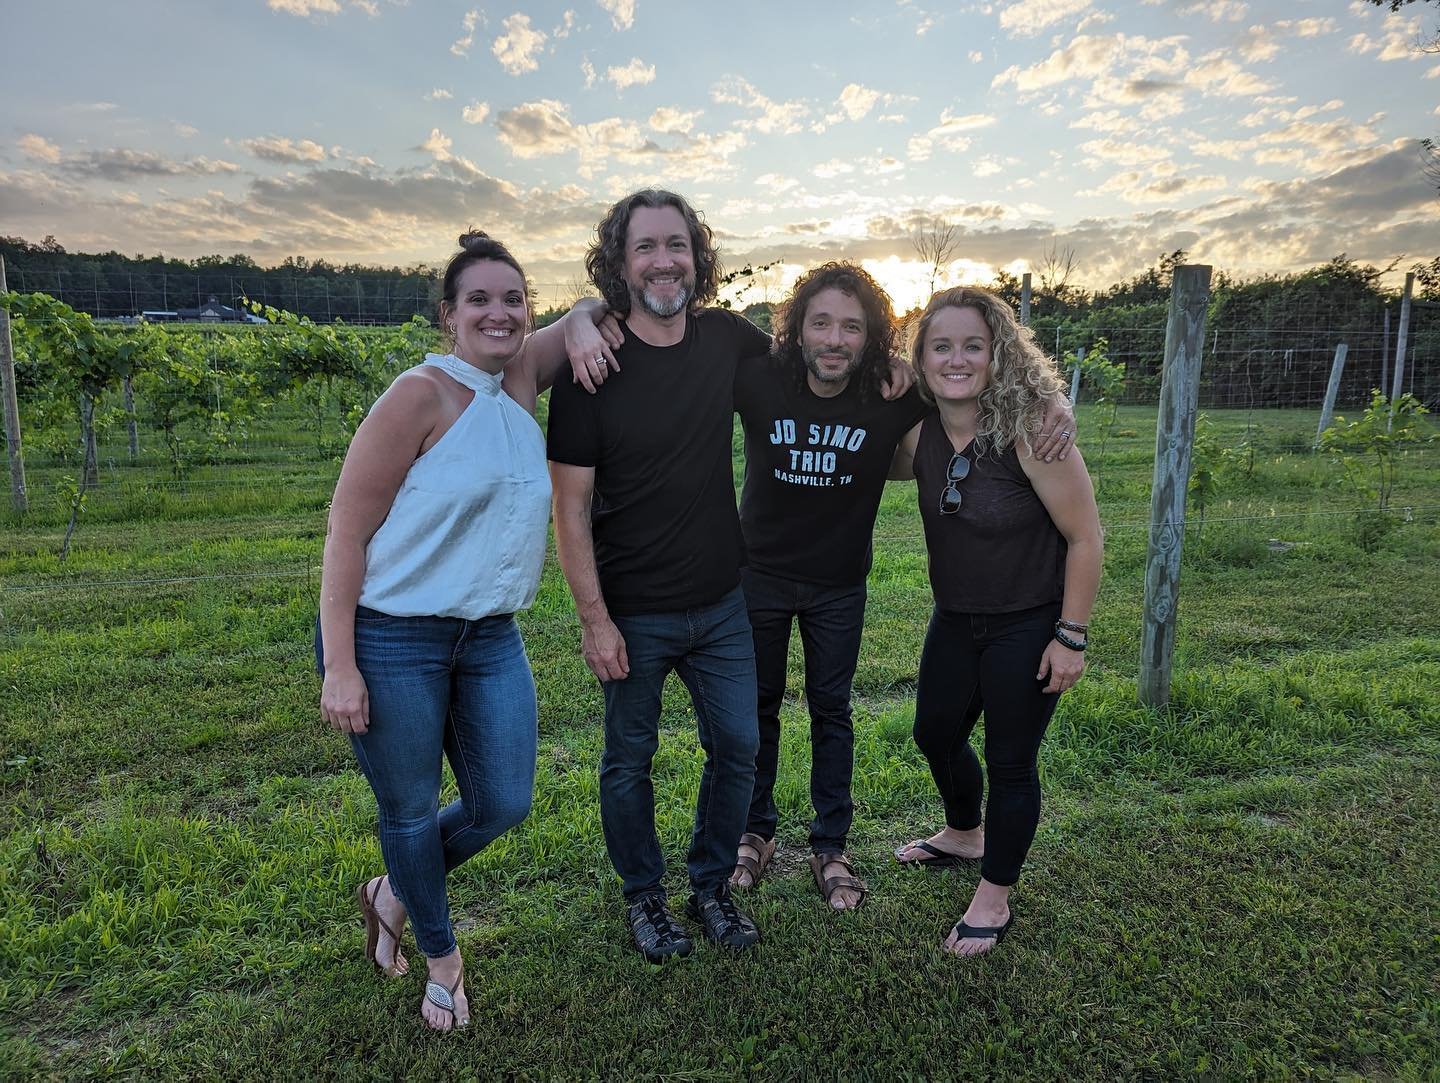 The most beautiful summer night playing music at a beautiful spot in the Finger Lakes. Thank you for the setting and hospitality Point of the Bluff Vineyards. We can&rsquo;t wait to come back again soon. ❤️
.
.
.
.
.
@pointofthebluffvineyards @visitt